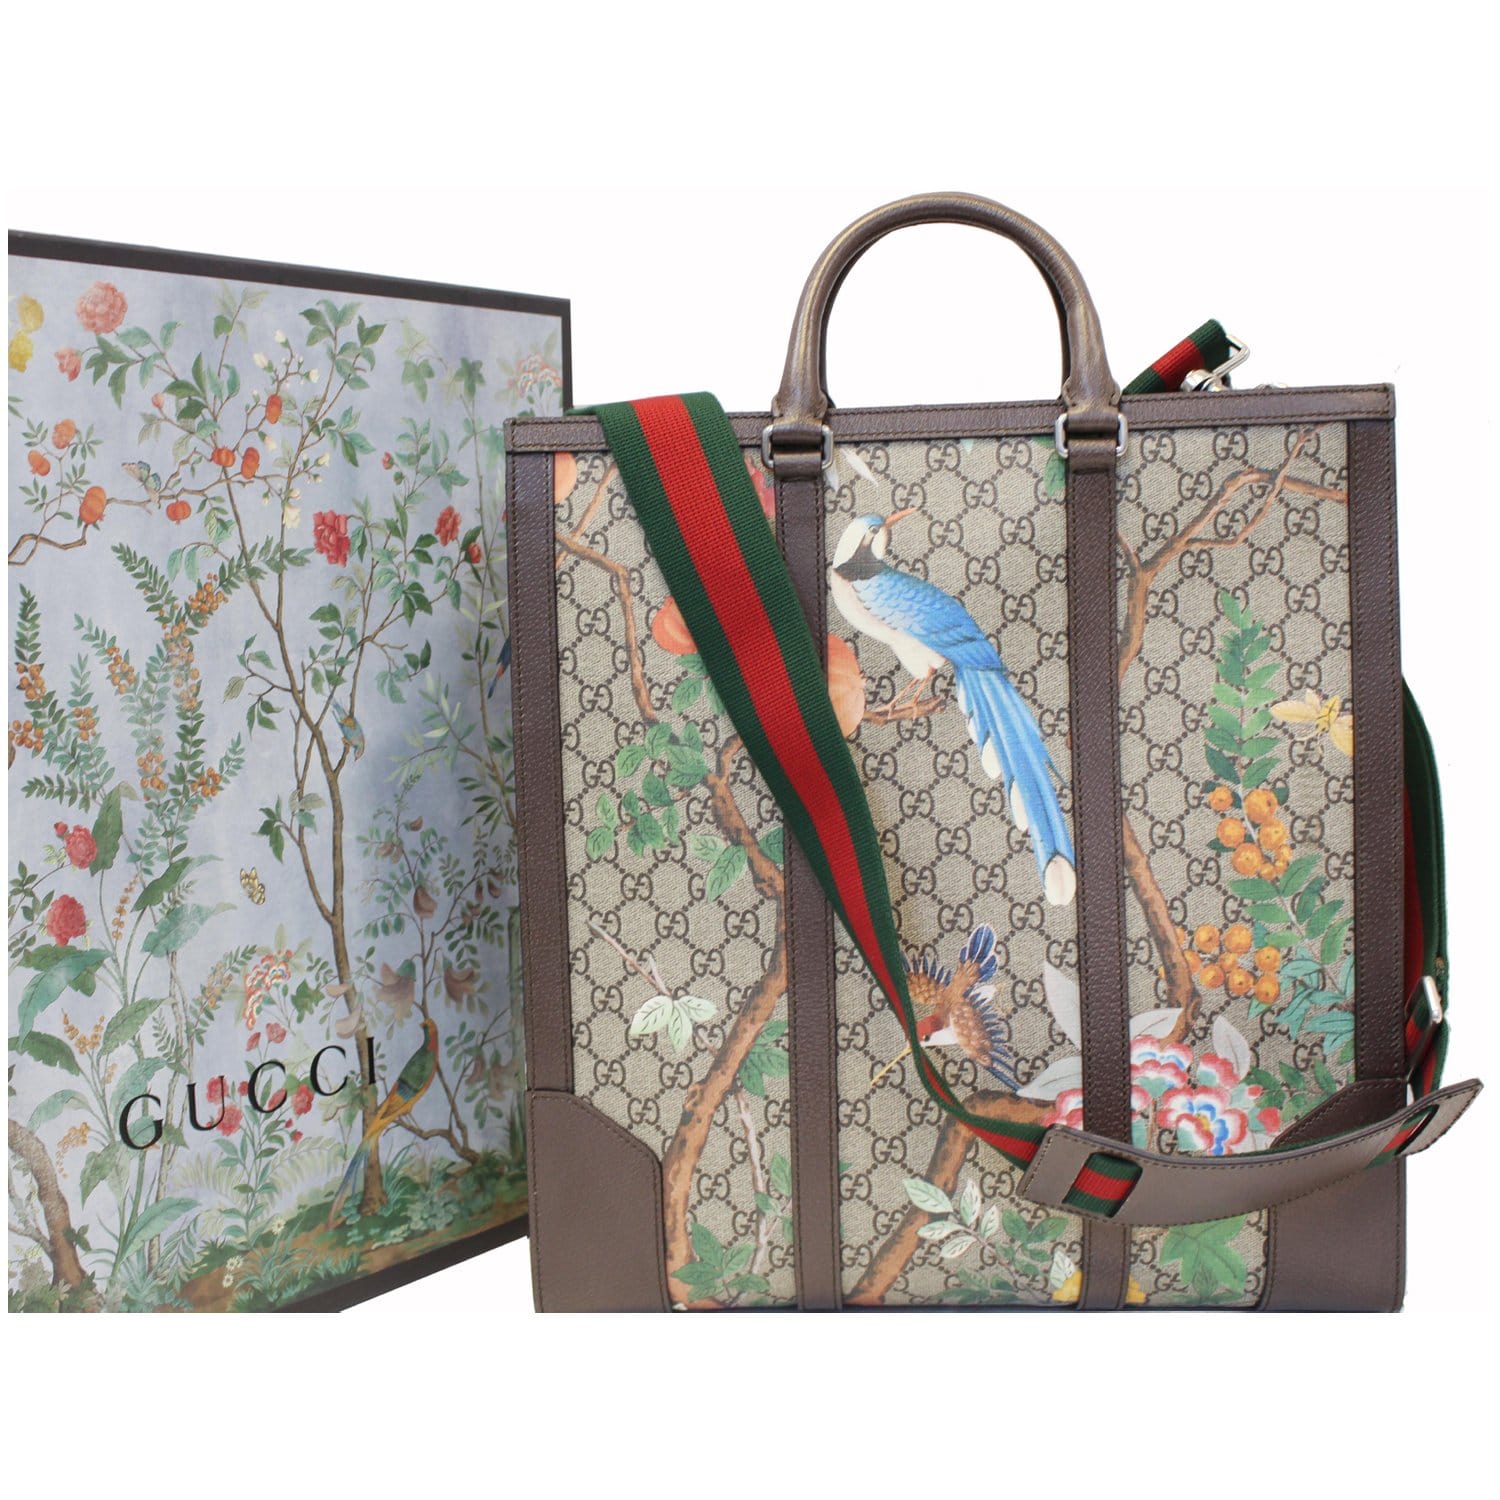 GUCCI GG Supreme Joy Tote Bag – Collections Couture